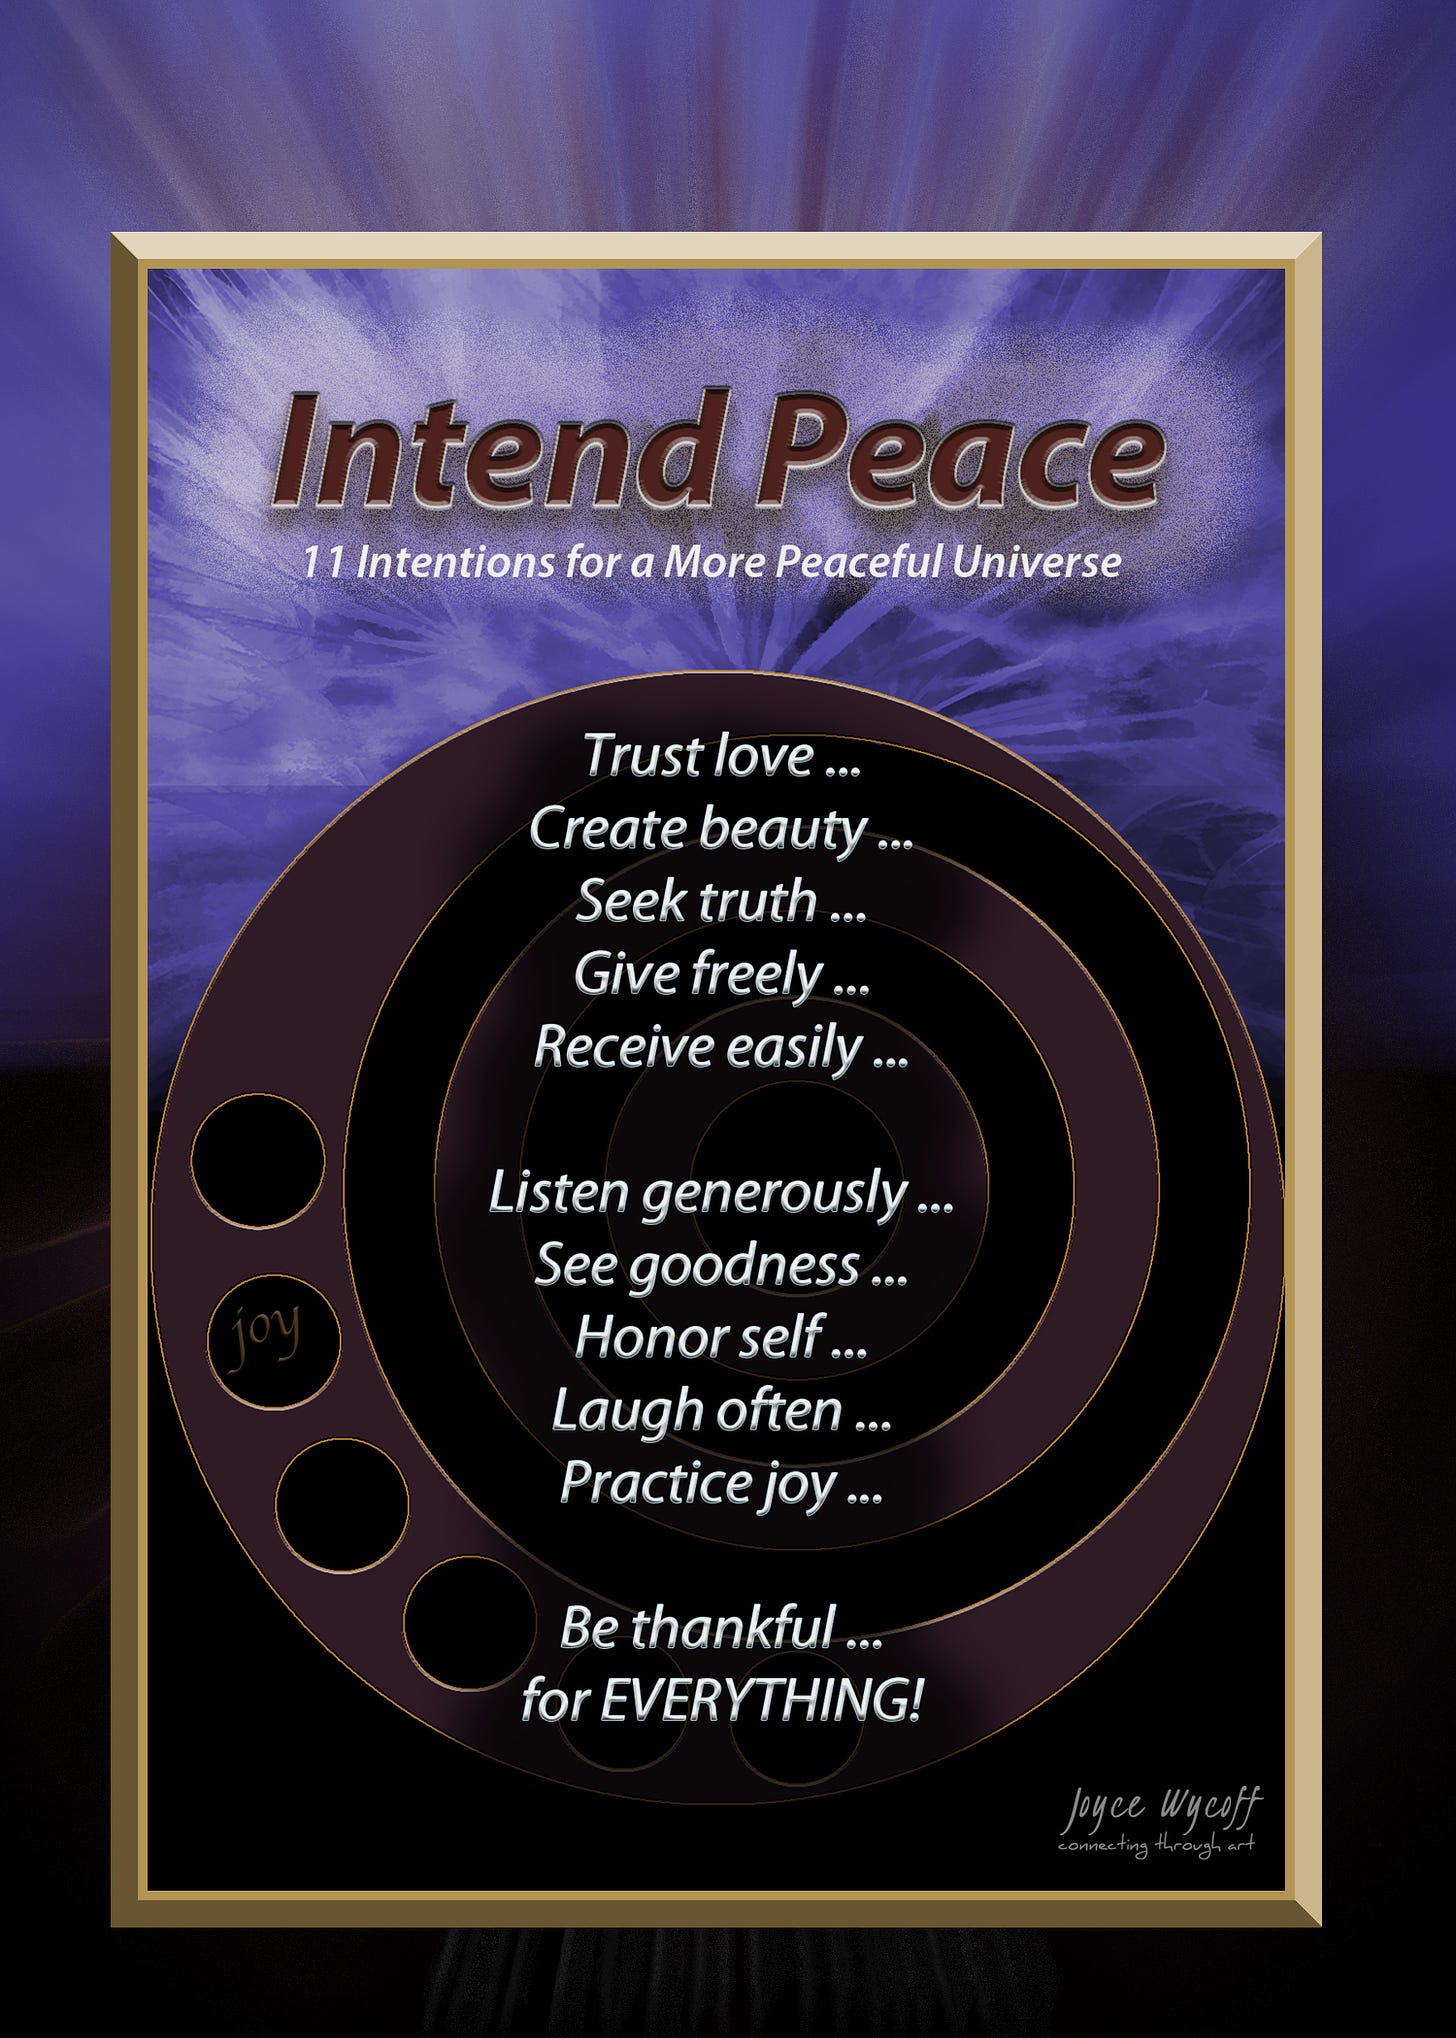 11 principles to Intend Peace